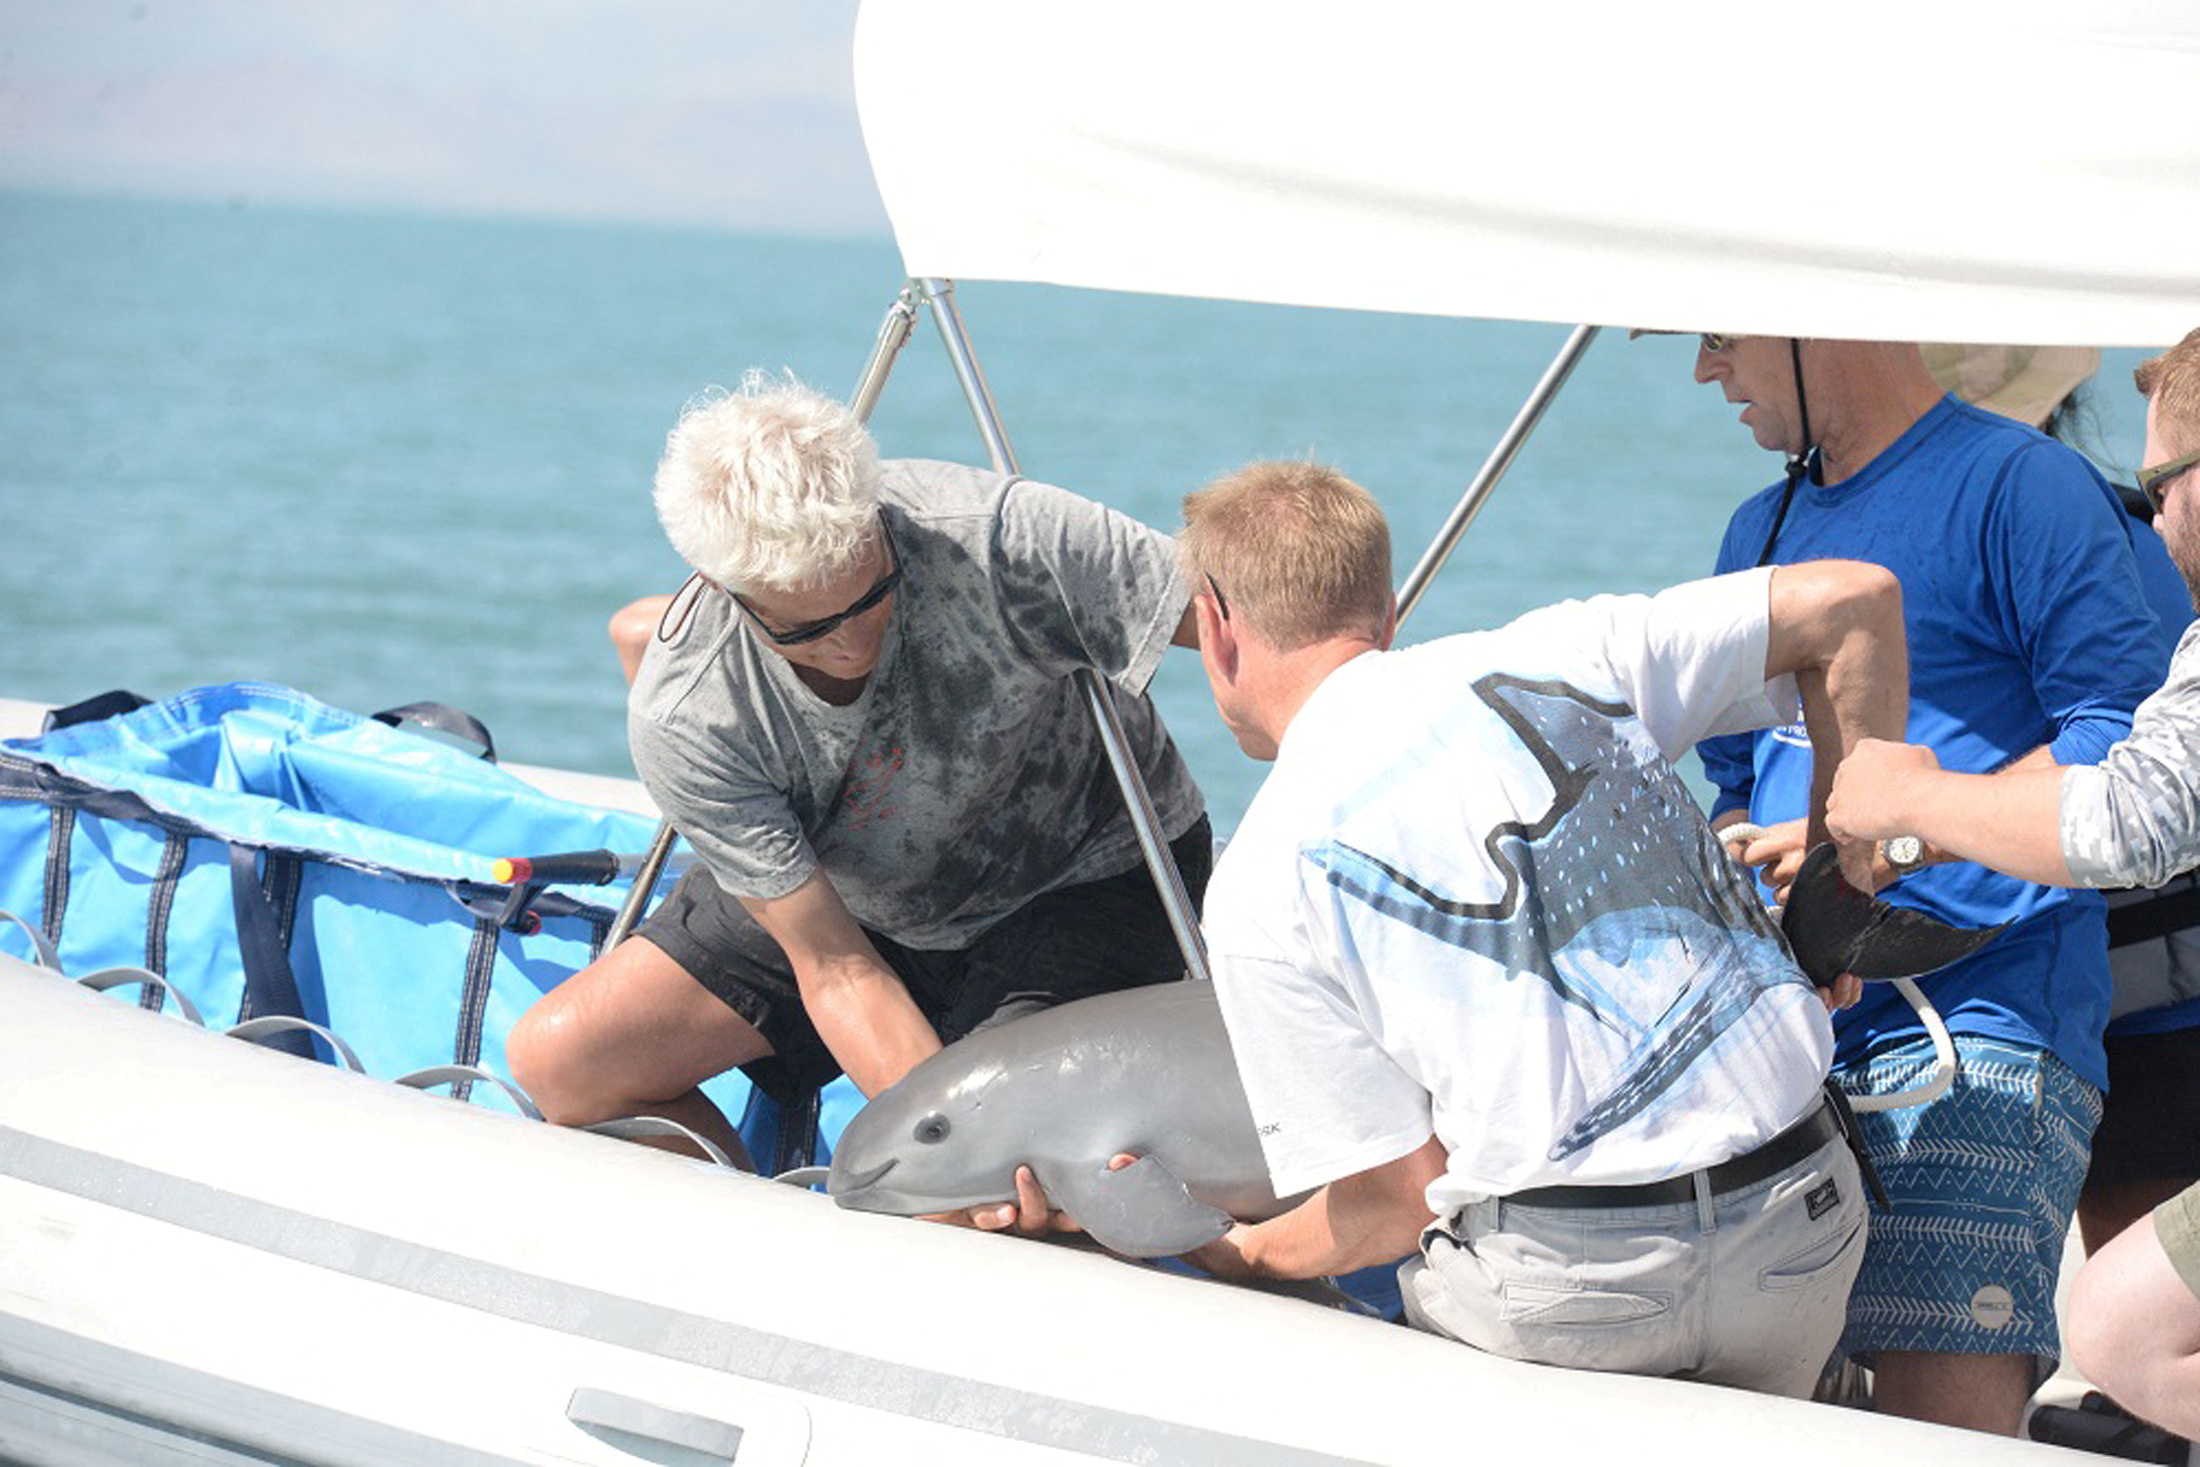 Scientists return a vaquita into the ocean as part of a conservation project, in the Sea of Cortez